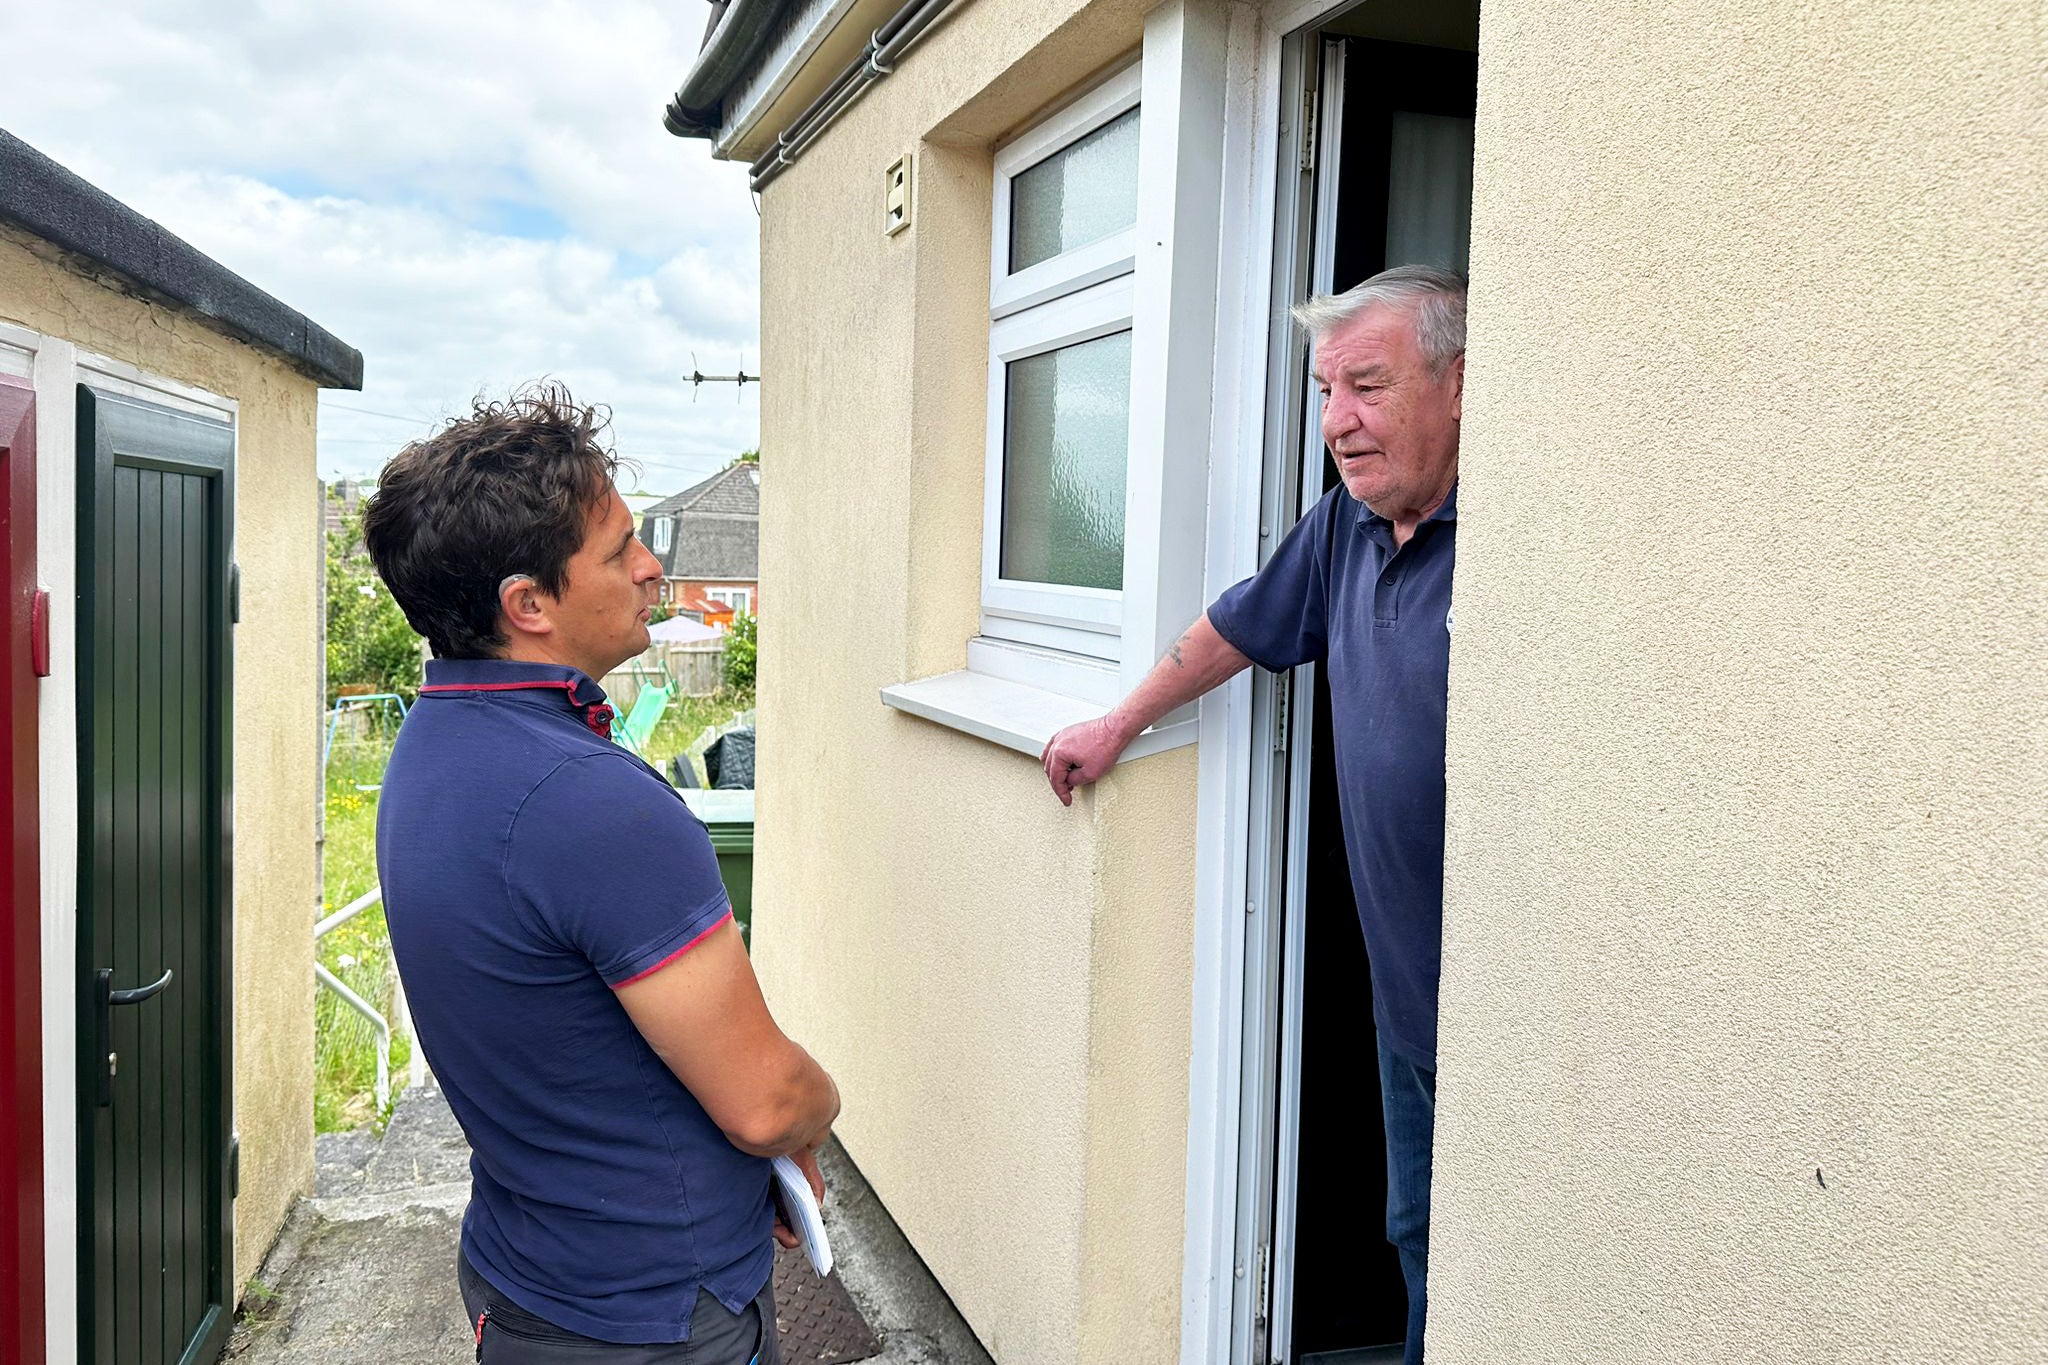 Johnny Mercer speaks at the door of one Conservative voter who picks up the issue on grass cutting